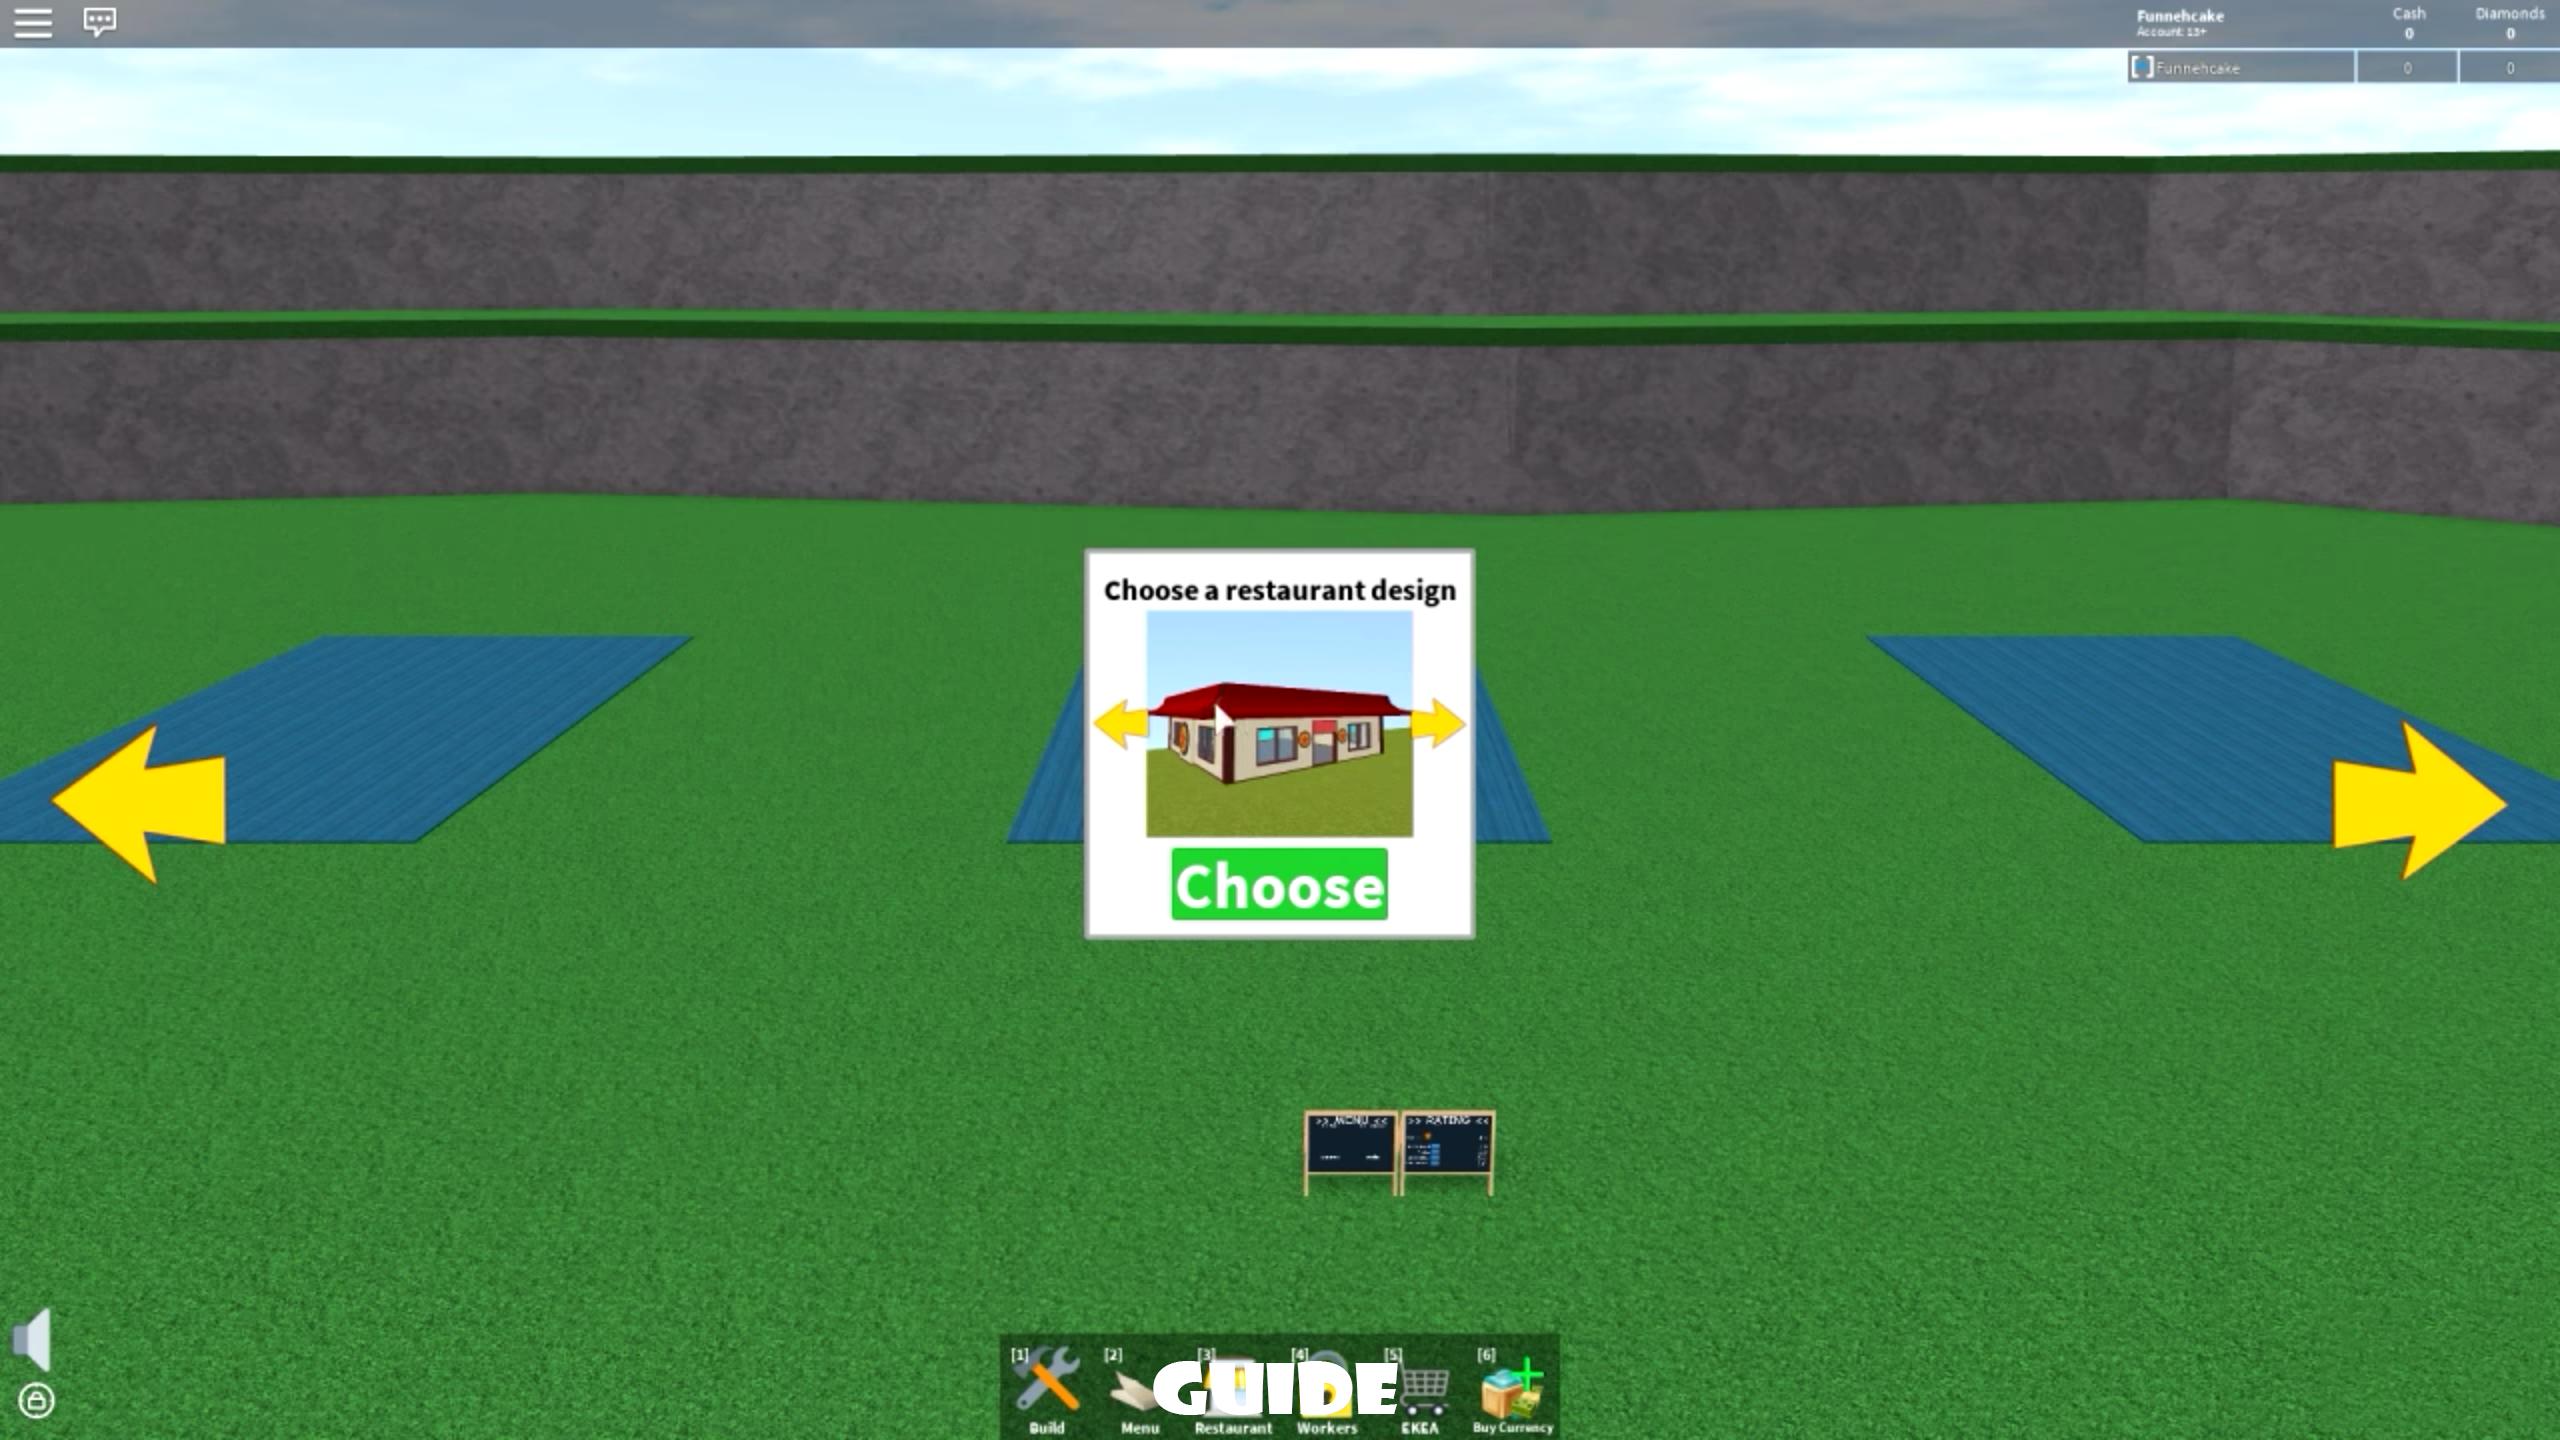 Roblox Weld Guide - clone tycoon 2 codes clone tycoon 2 code 2020 list roblox clone tycoon 2 code 2020 list clone tycoon 2 cheats fandom clone tycoon 2 co in 2020 coding game codes